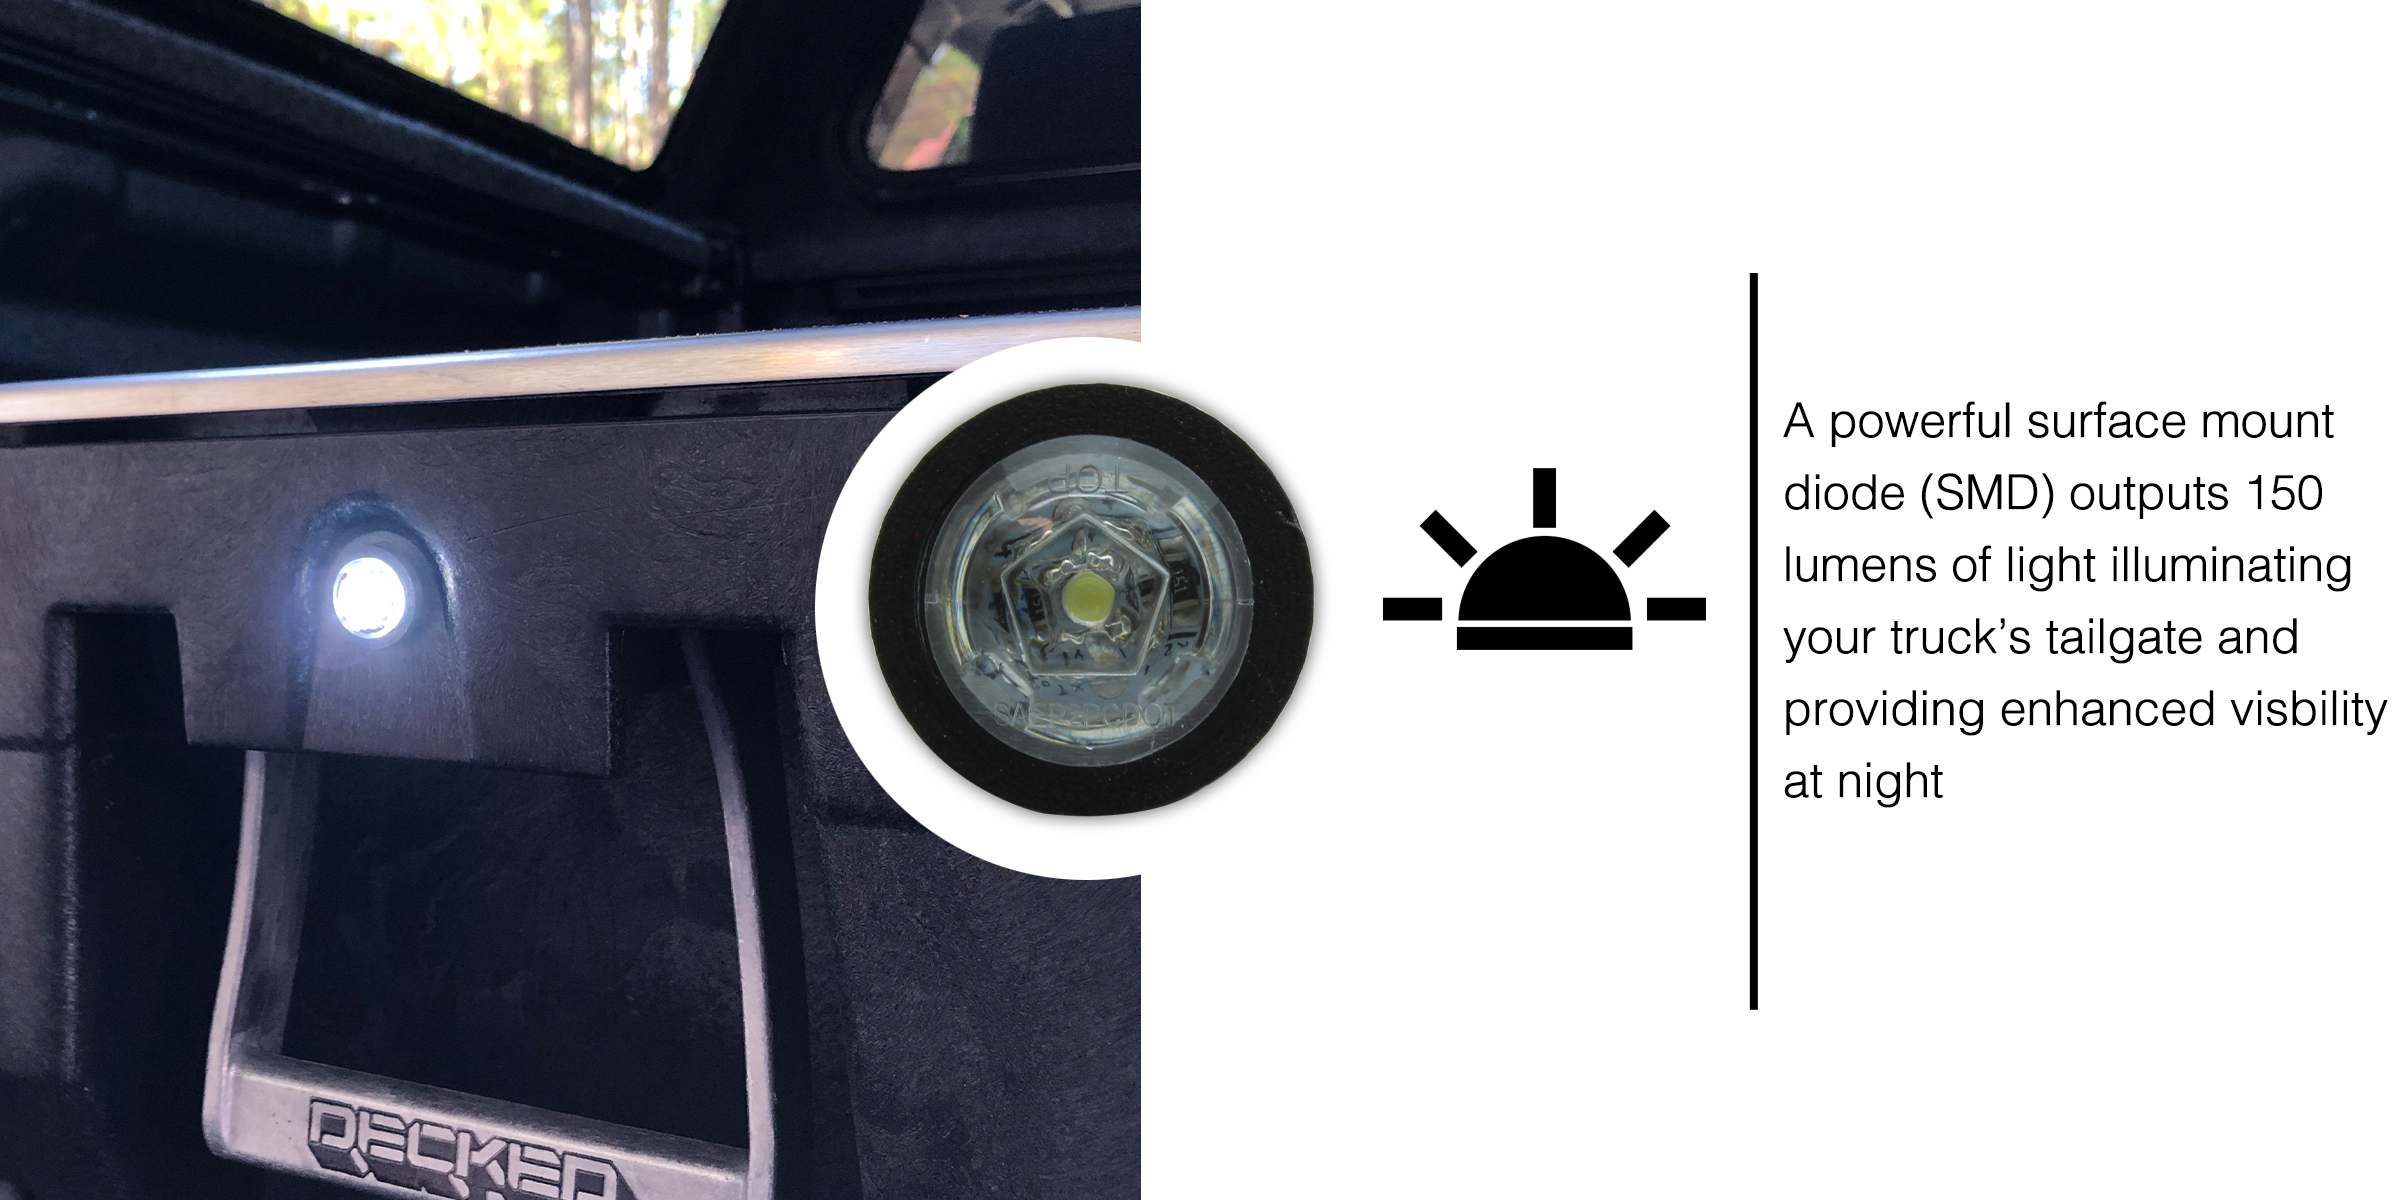 A powerful surface mount diode (SMD) outputs 150 lumens of light illuminating your truck’s tailgate and providing enhanced visbility at night 